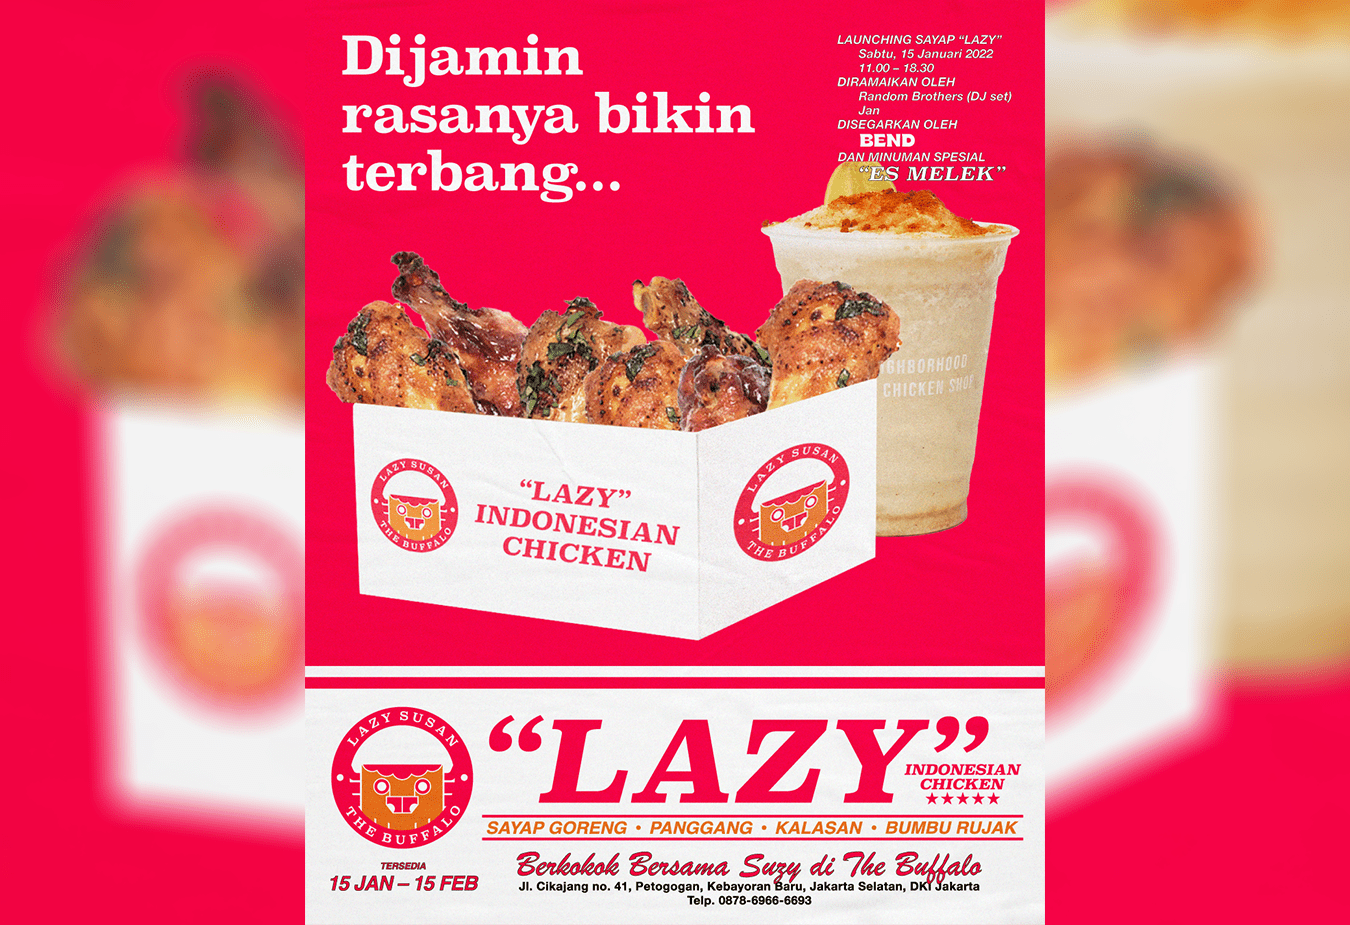 “LAZY” Indonesian Chicken by Lazy Susan and The Buffalo